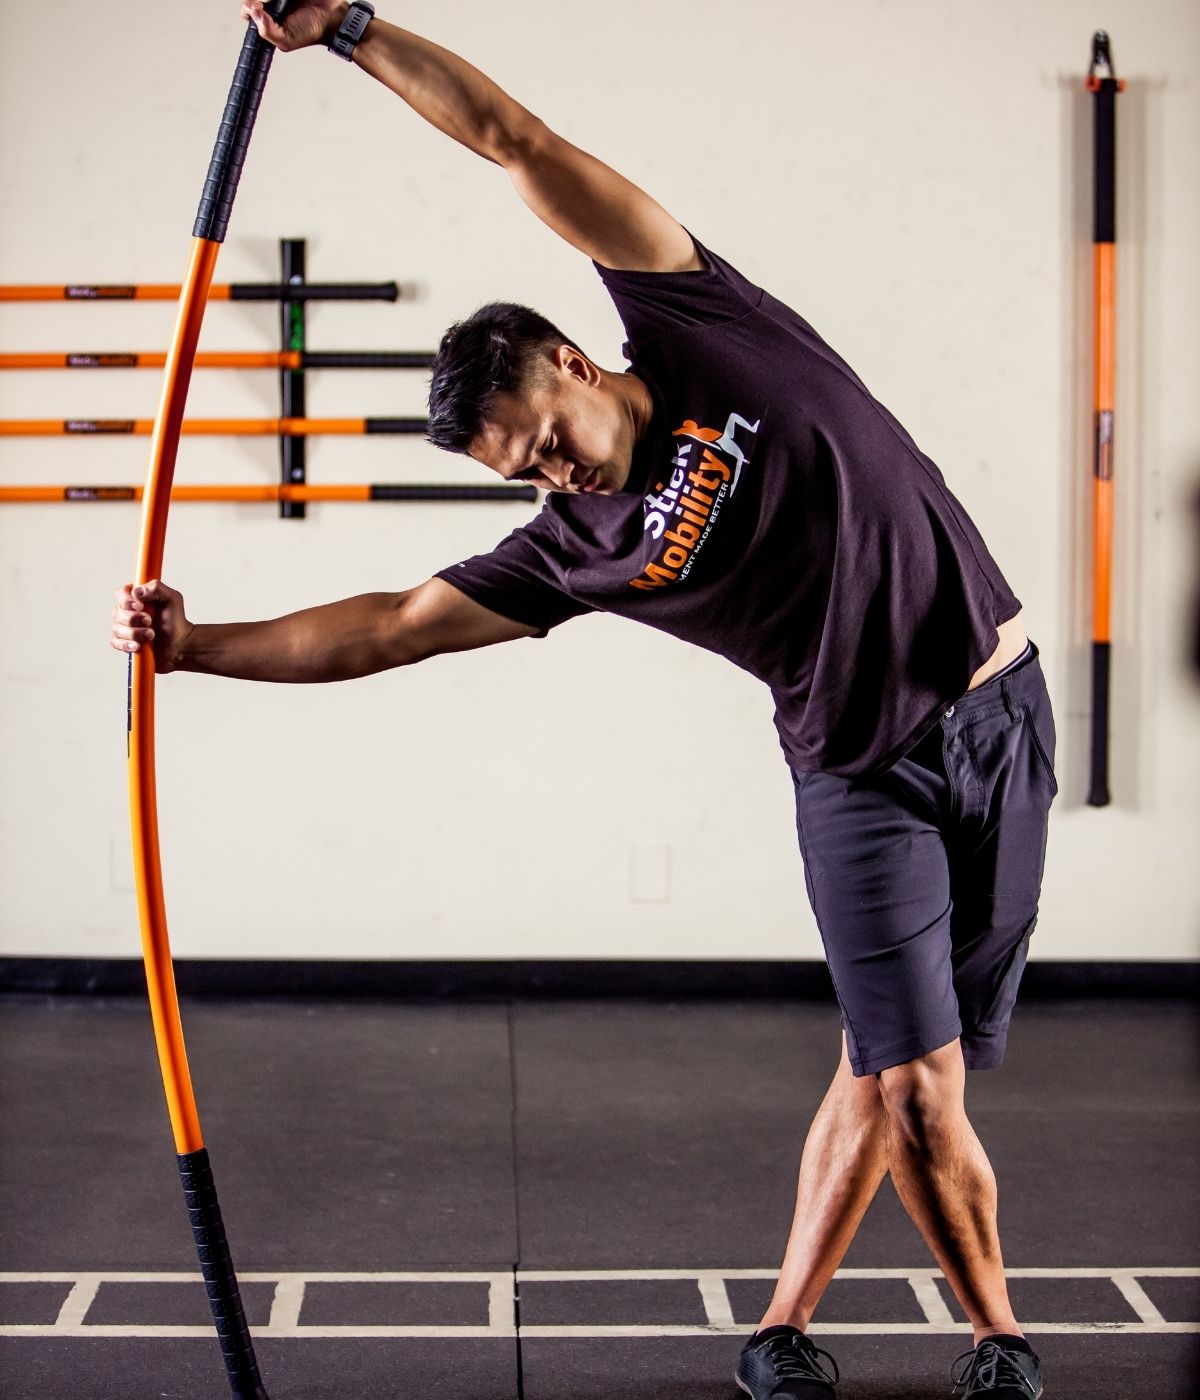 Stick Mobility demonstrated by man in gym